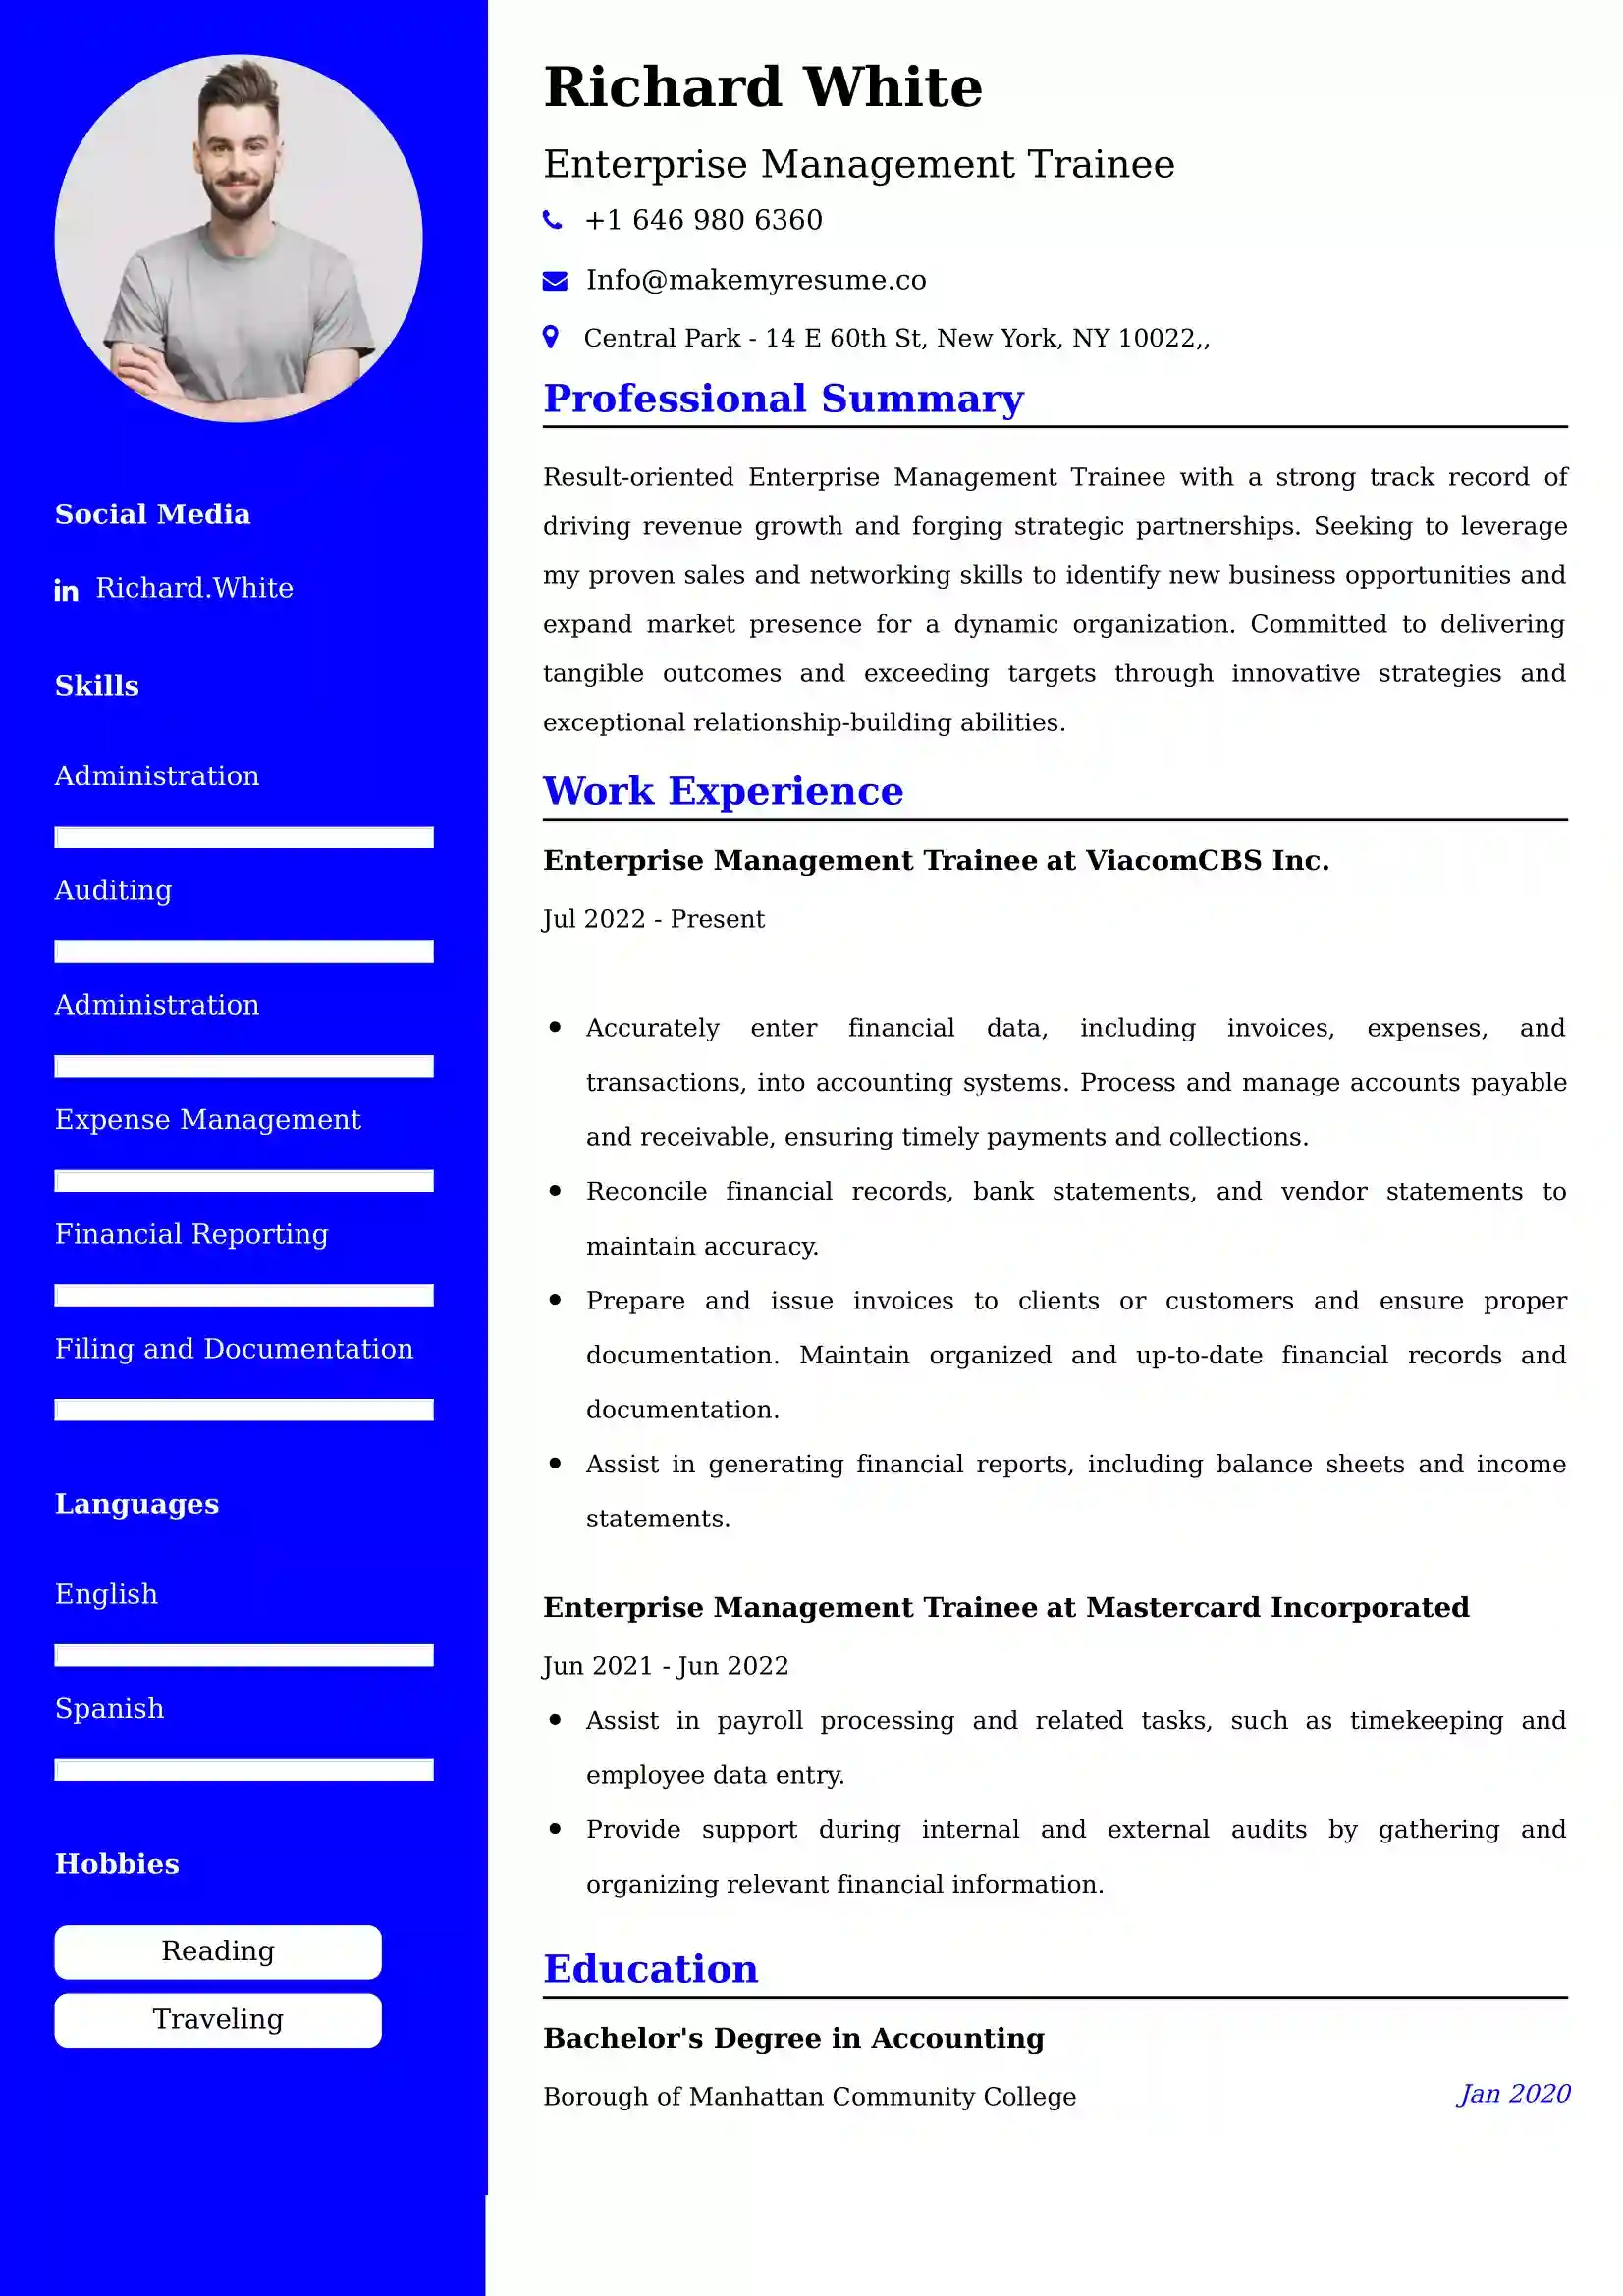 Enterprise Management Trainee Resume Examples - Australian Format and Tips